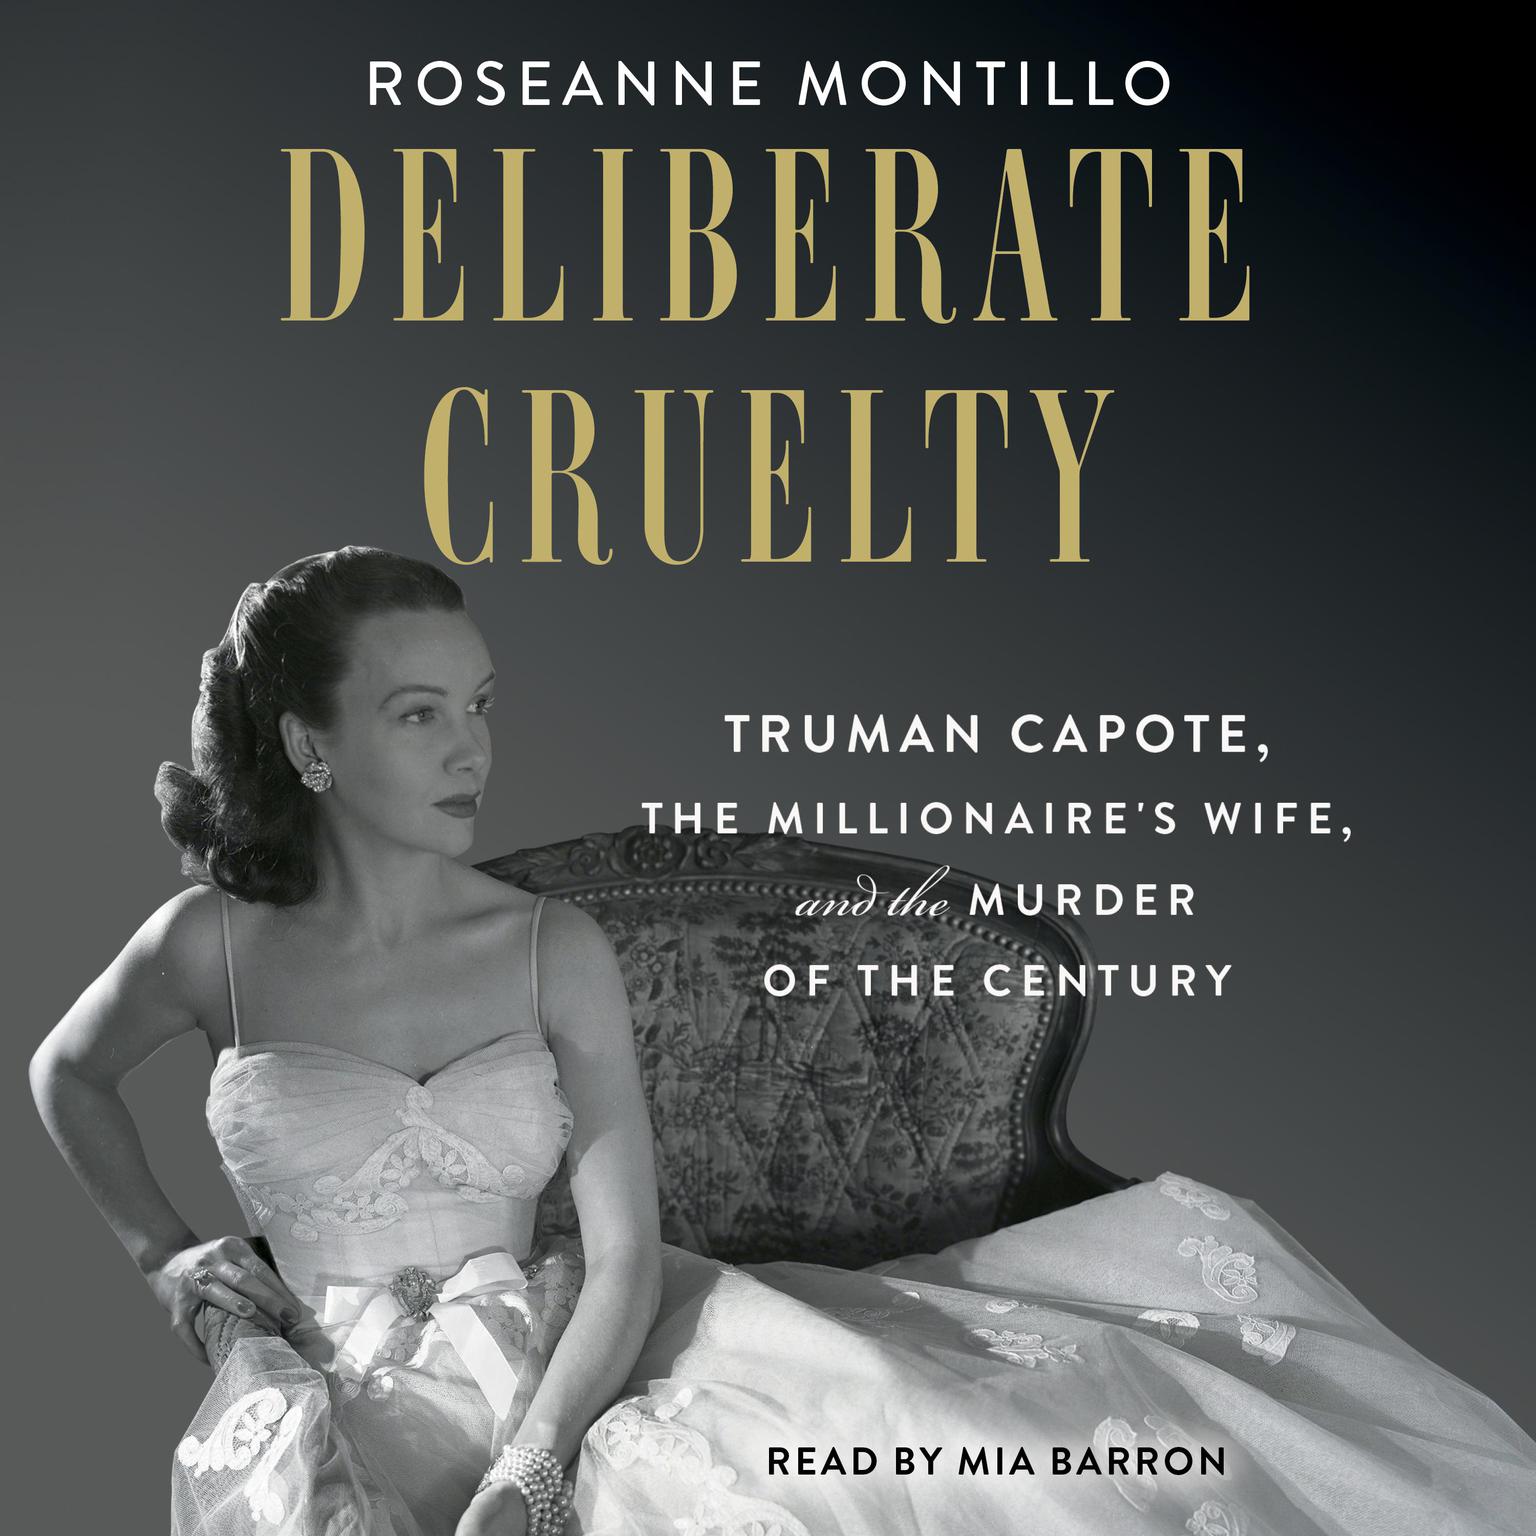 Deliberate Cruelty: Truman Capote, the Millionaires Wife, and the Murder of the Century Audiobook, by Roseanne Montillo